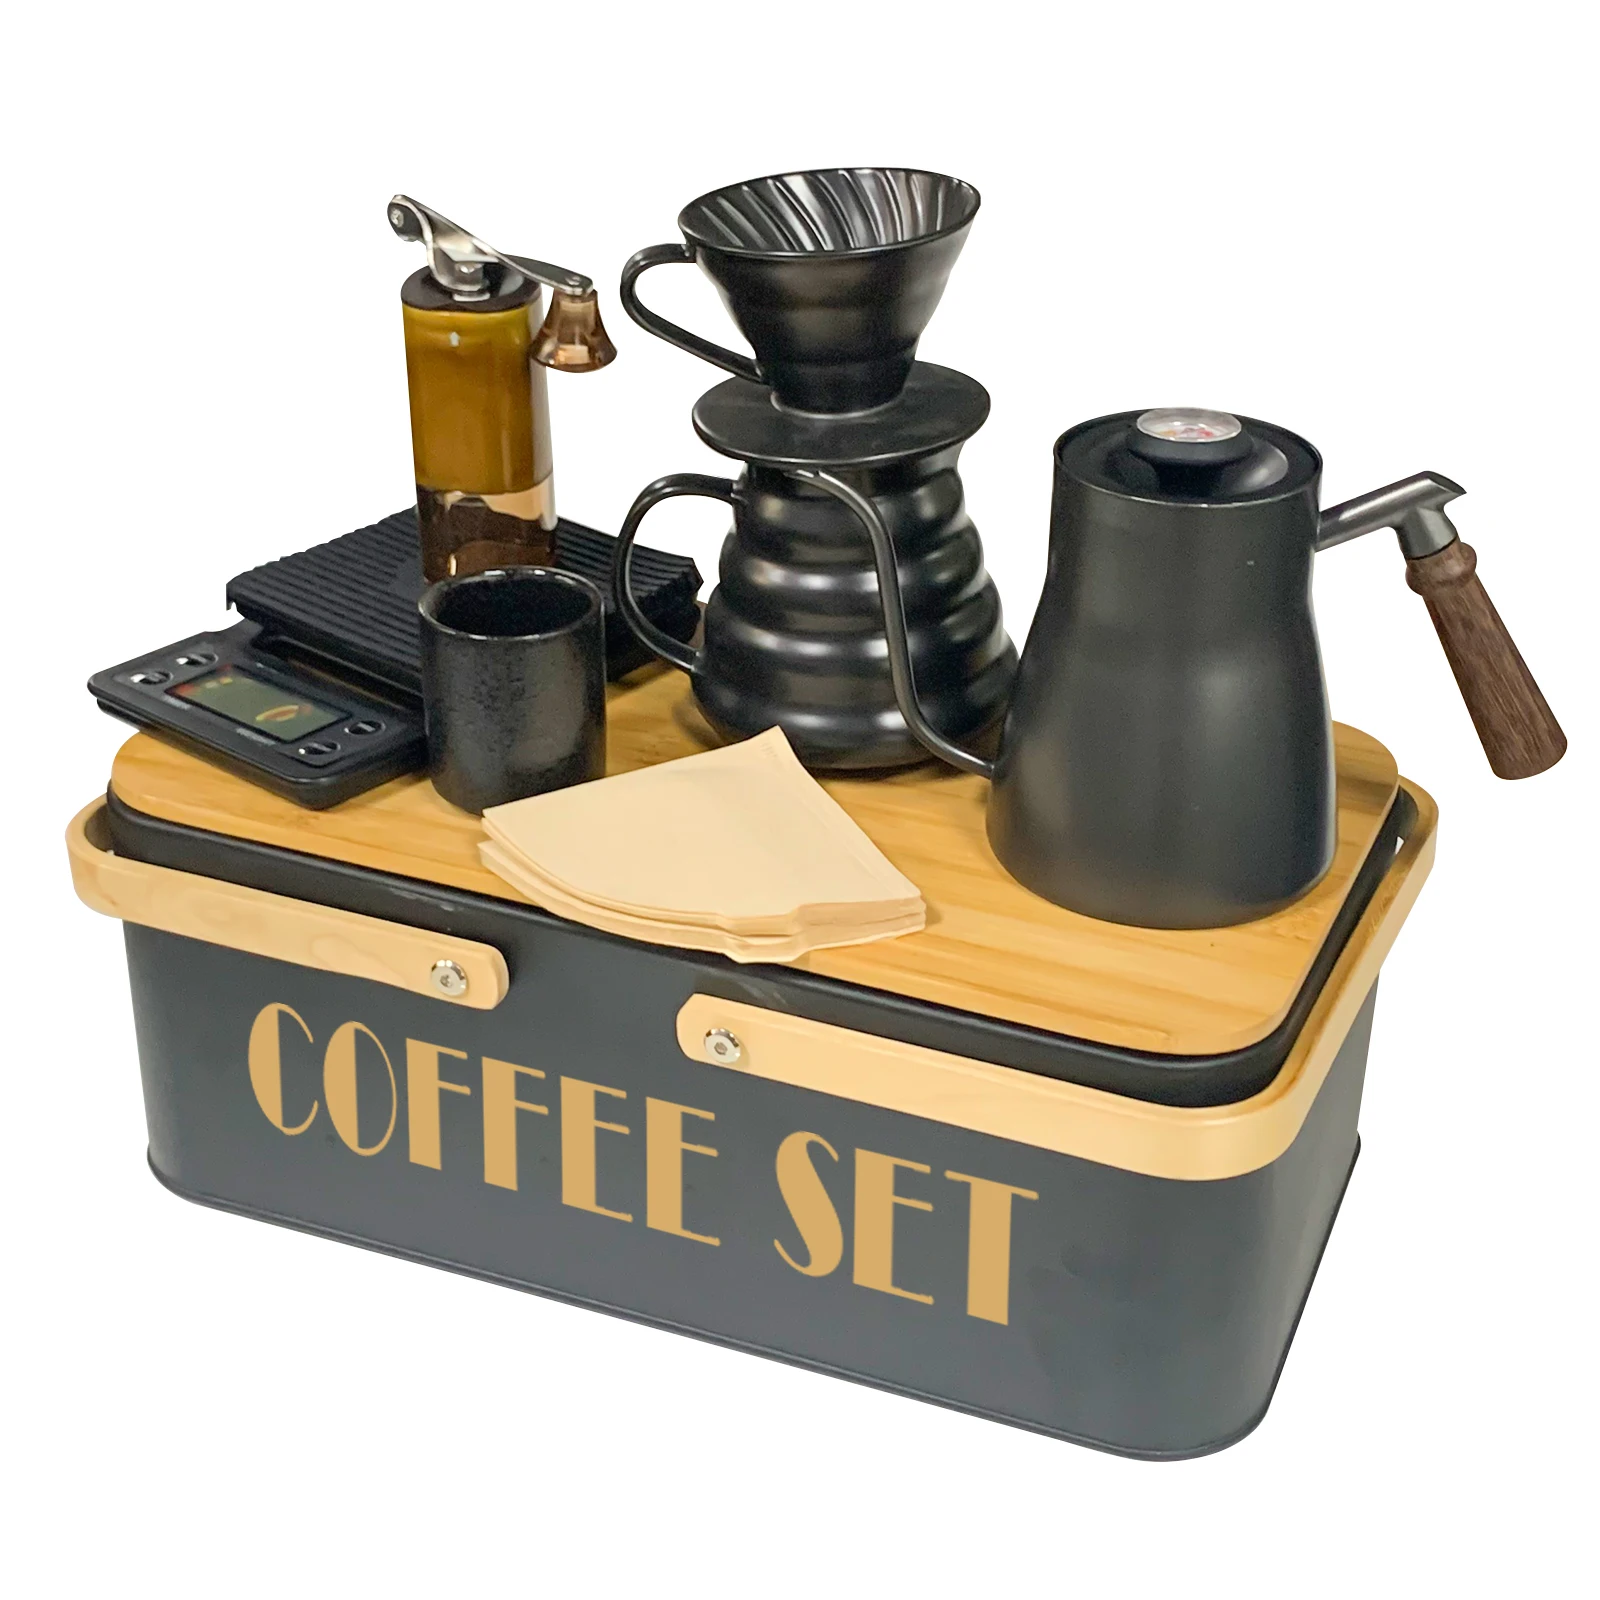 https://ae01.alicdn.com/kf/S629dc8b6ebc64d8dbb1f09d4cef6570cq/Luxury-Pour-Over-Coffee-Maker-Set-with-Dripper-Server-Coffee-Kettle-Manual-Grinder-Filter-Paper-Metal.jpg